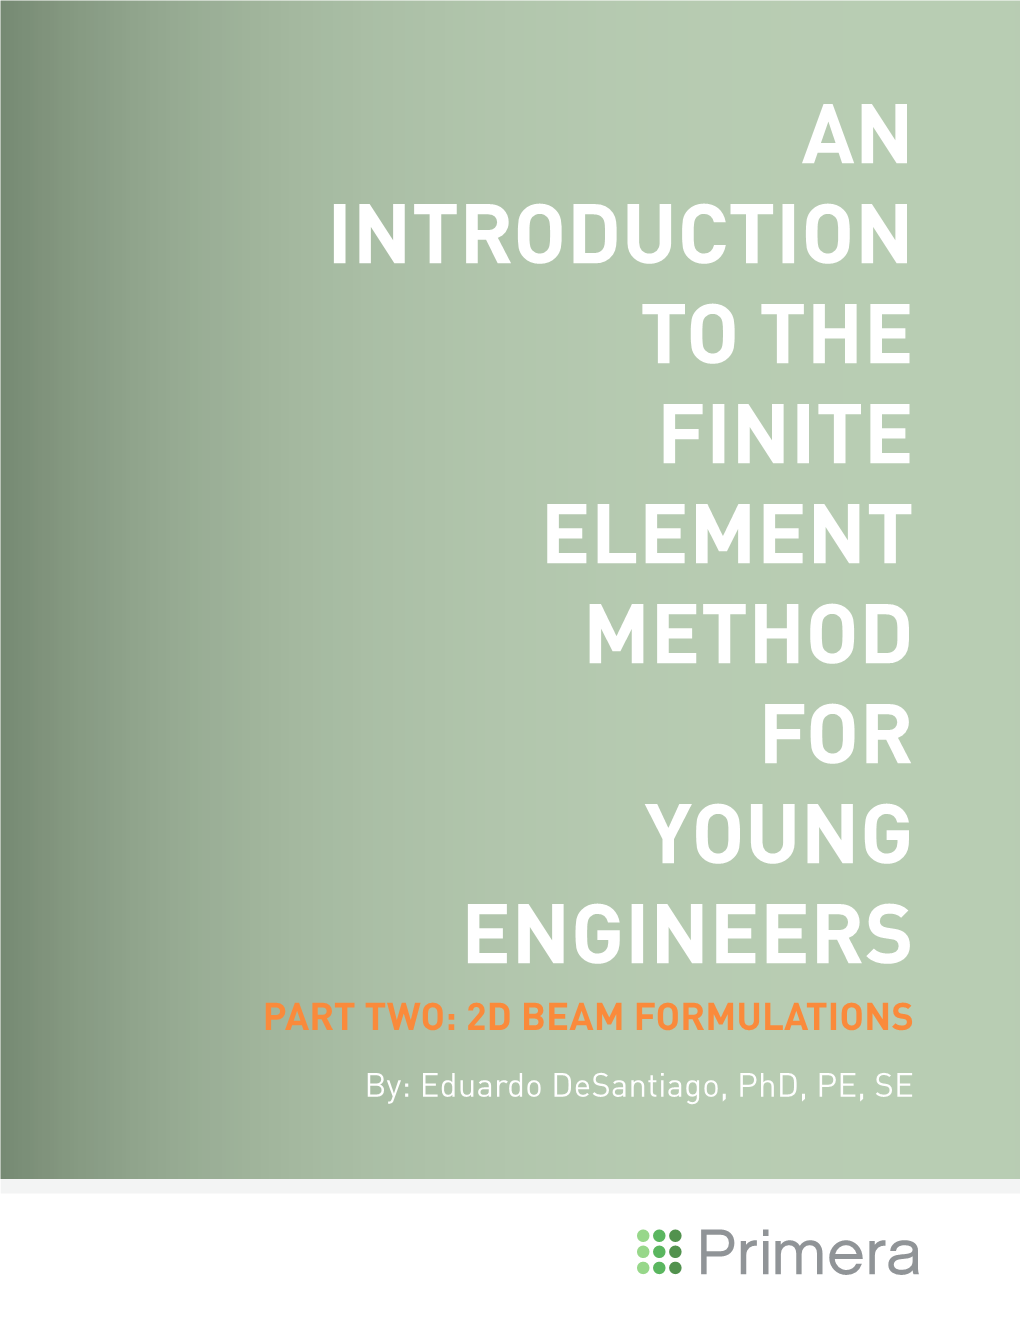 AN INTRODUCTION to the FINITE ELEMENT METHOD for YOUNG ENGINEERS PART TWO: 2D BEAM FORMULATIONS By: Eduardo Desantiago, Phd, PE, SE